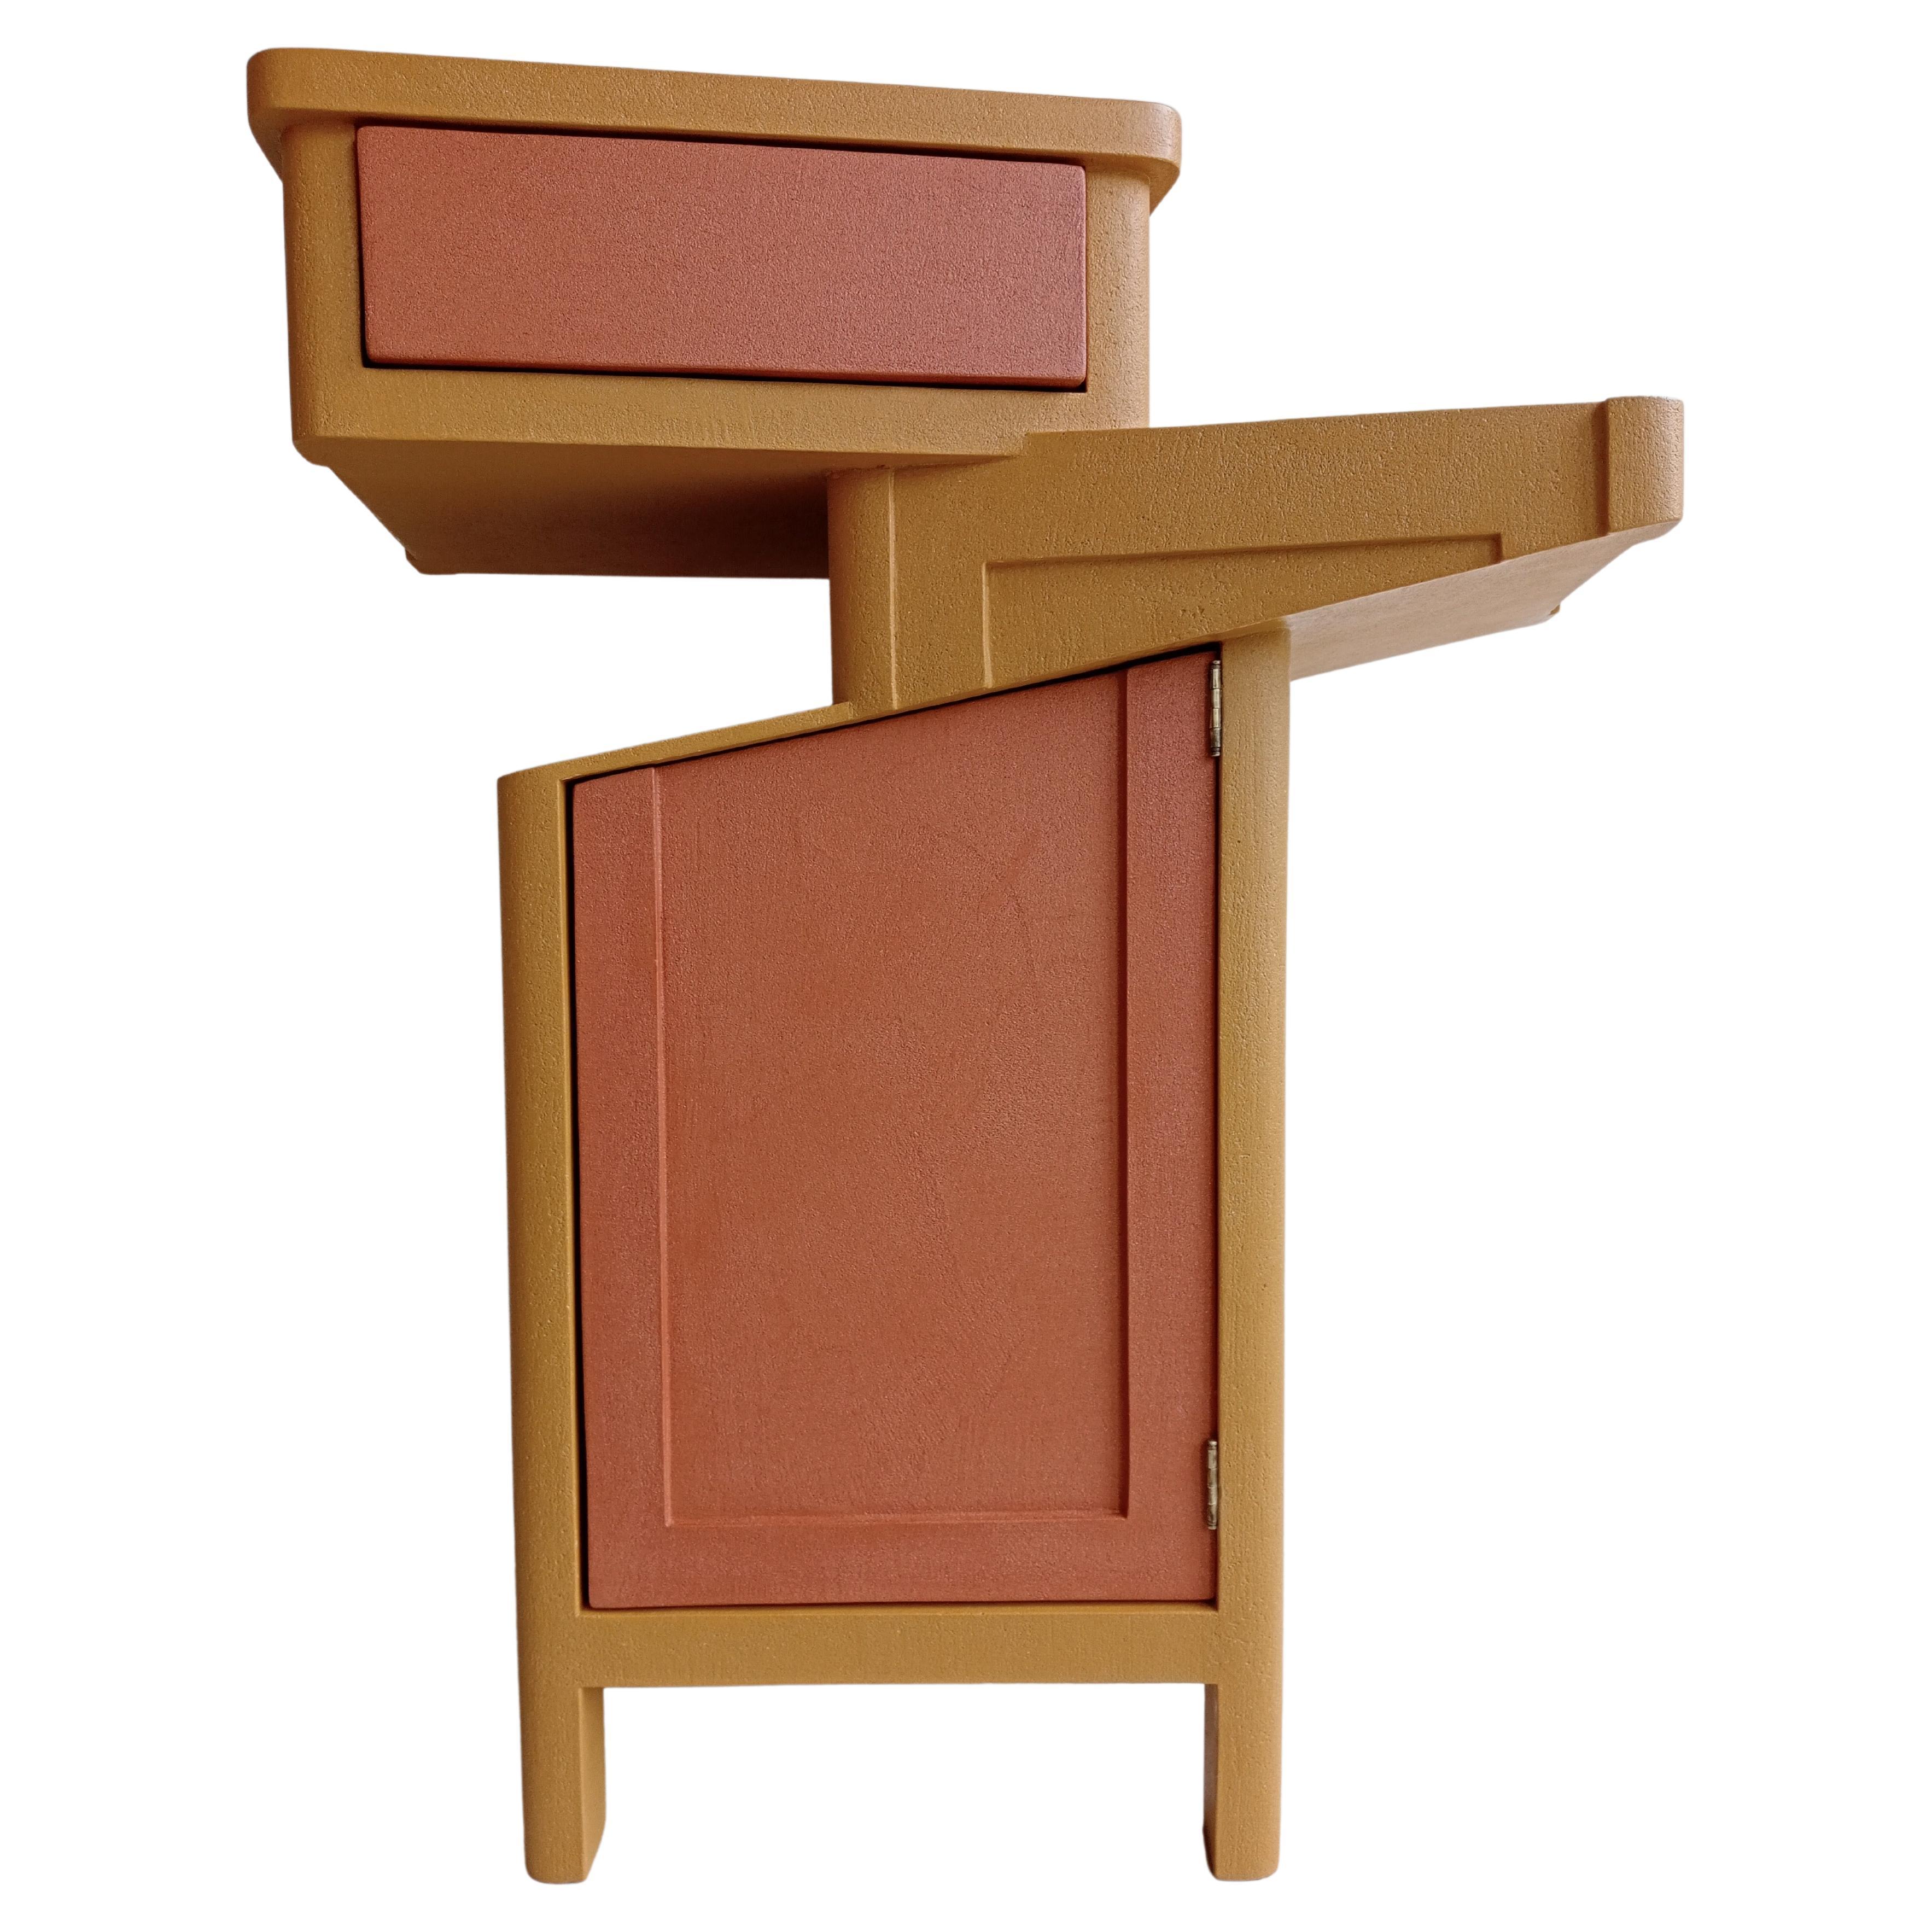 Cabinet Sculpture Italian Design Contemporary in Wood and Resin coloured For Sale